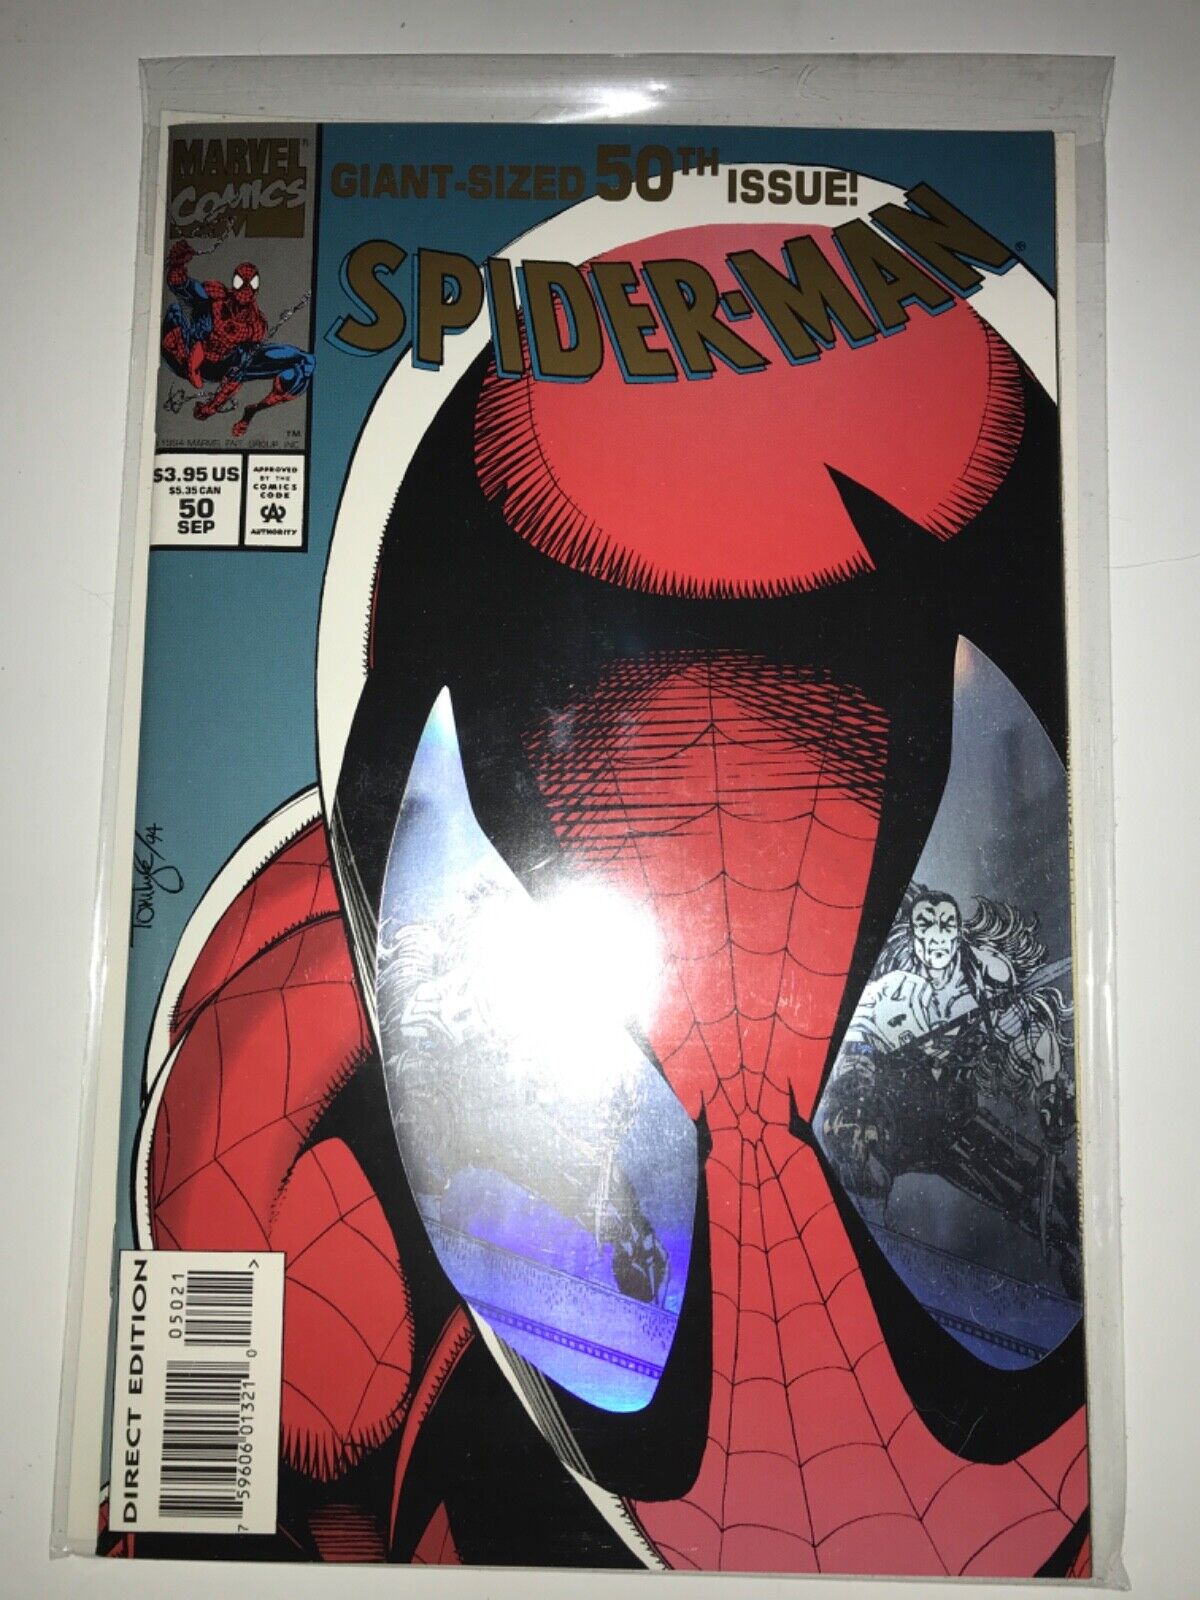 SPIDER-MAN GIANT-SIZE (1990) #50 HOLOGRAPHIC FOIL COVER SEP 1994 MARVEL - King Gaming 